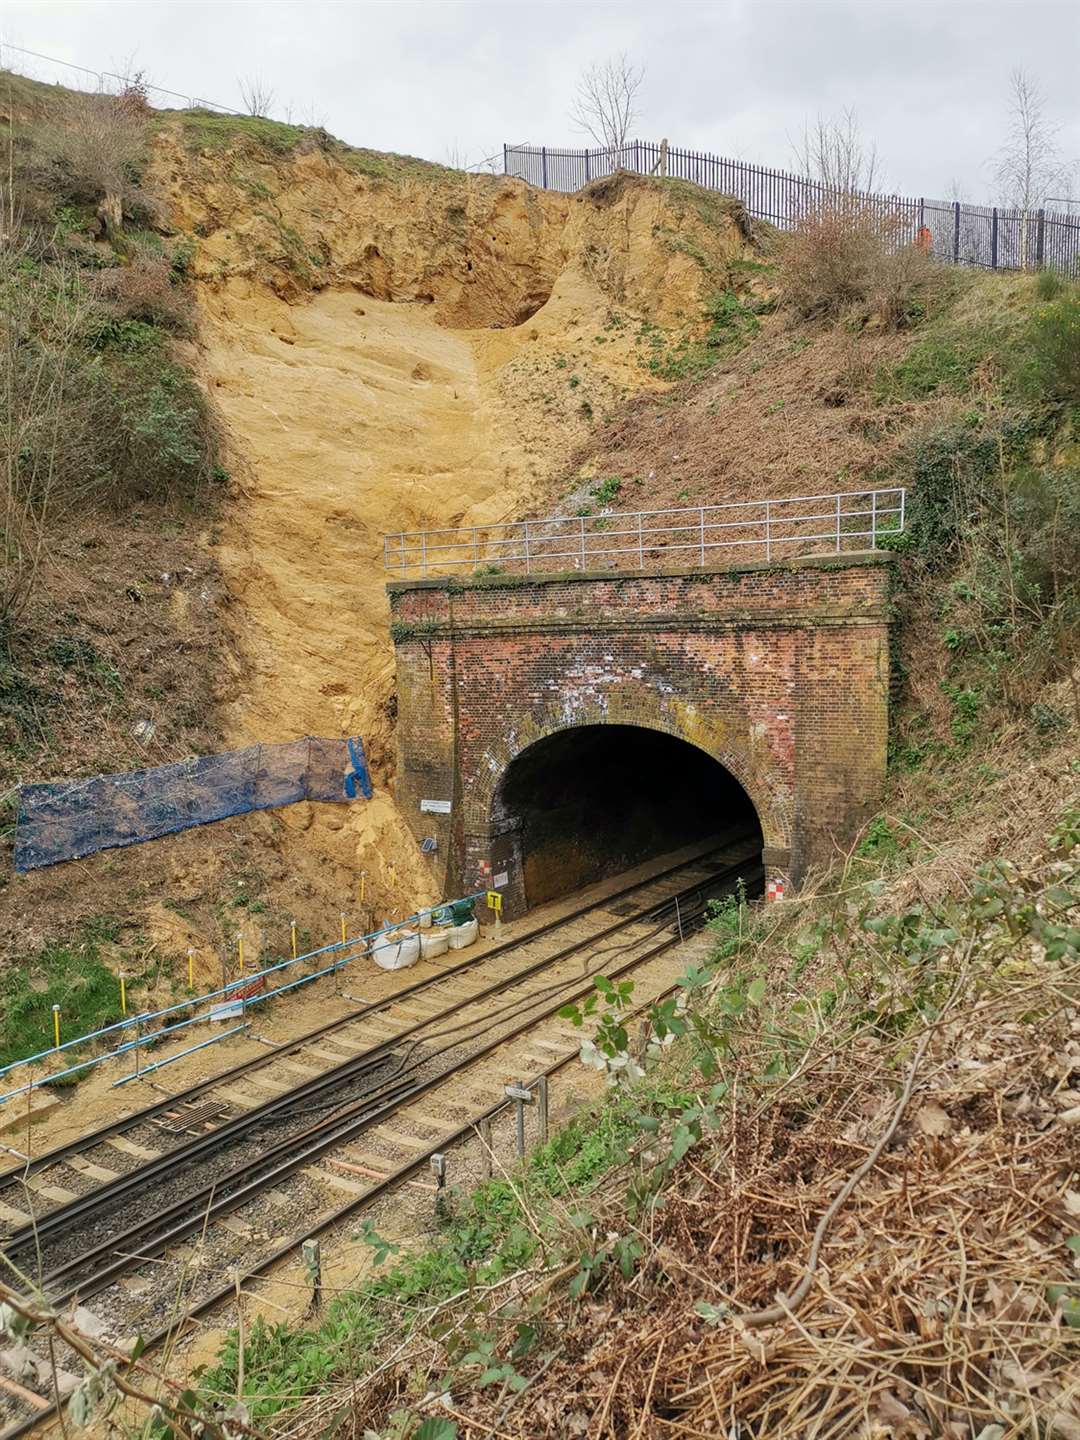 The area where the small cave was discovered (Network Rail/PA)